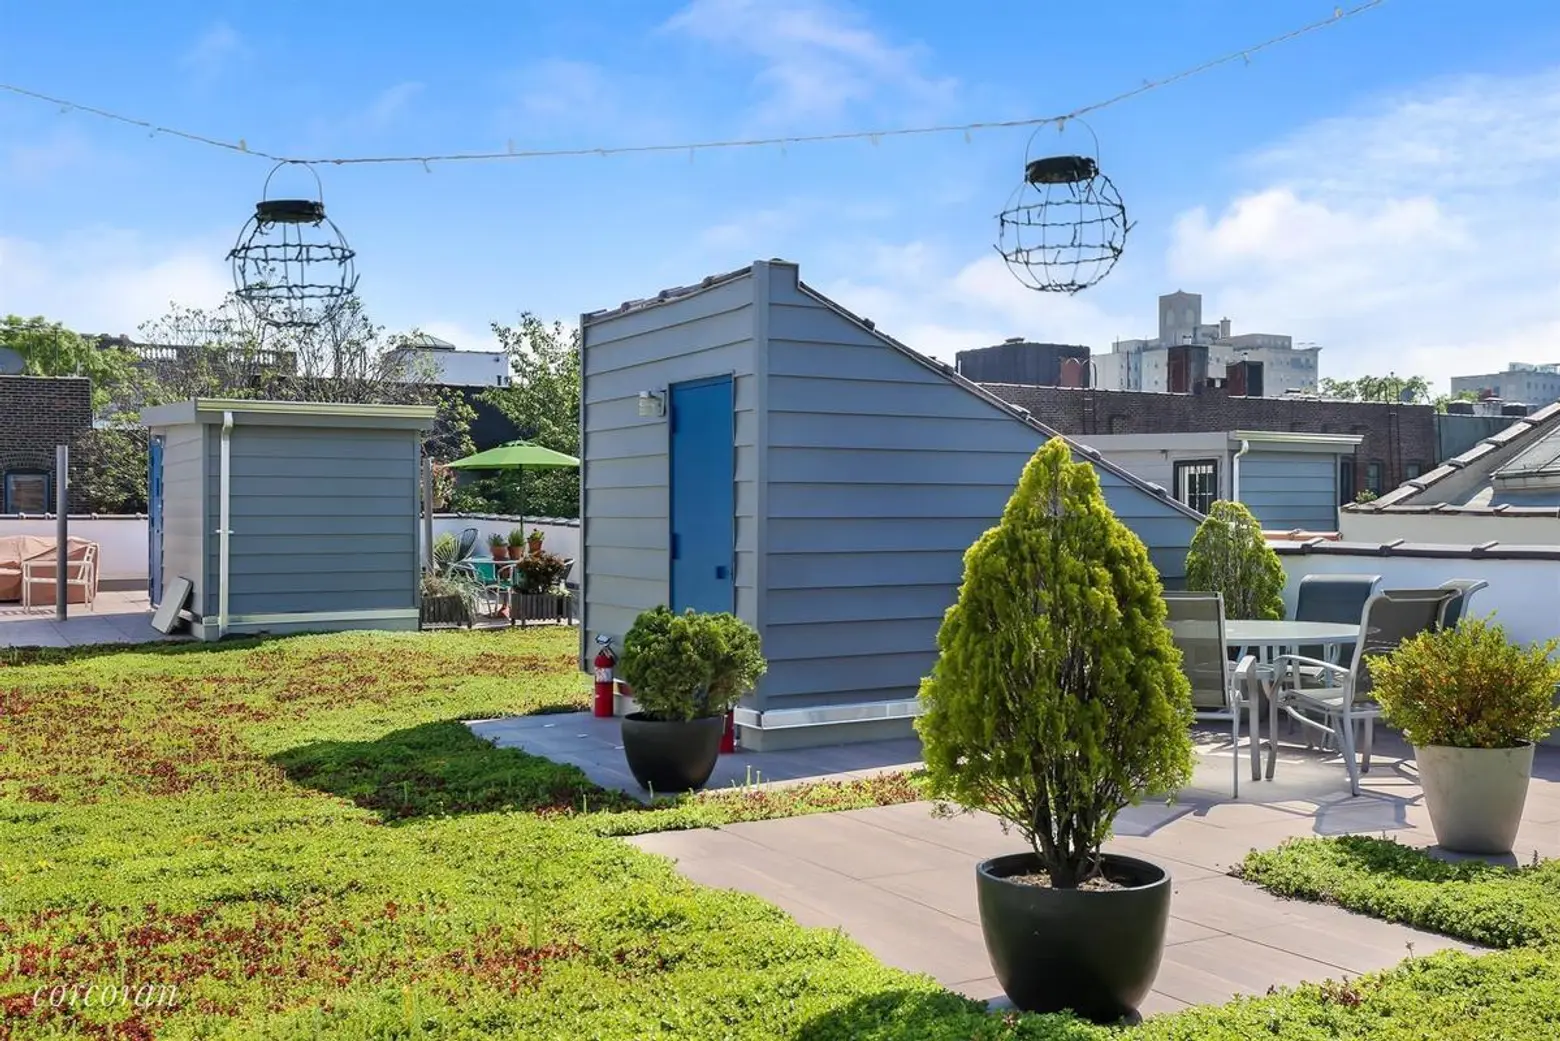 Enjoy a living green roof at this $800K Prospect Heights co-op